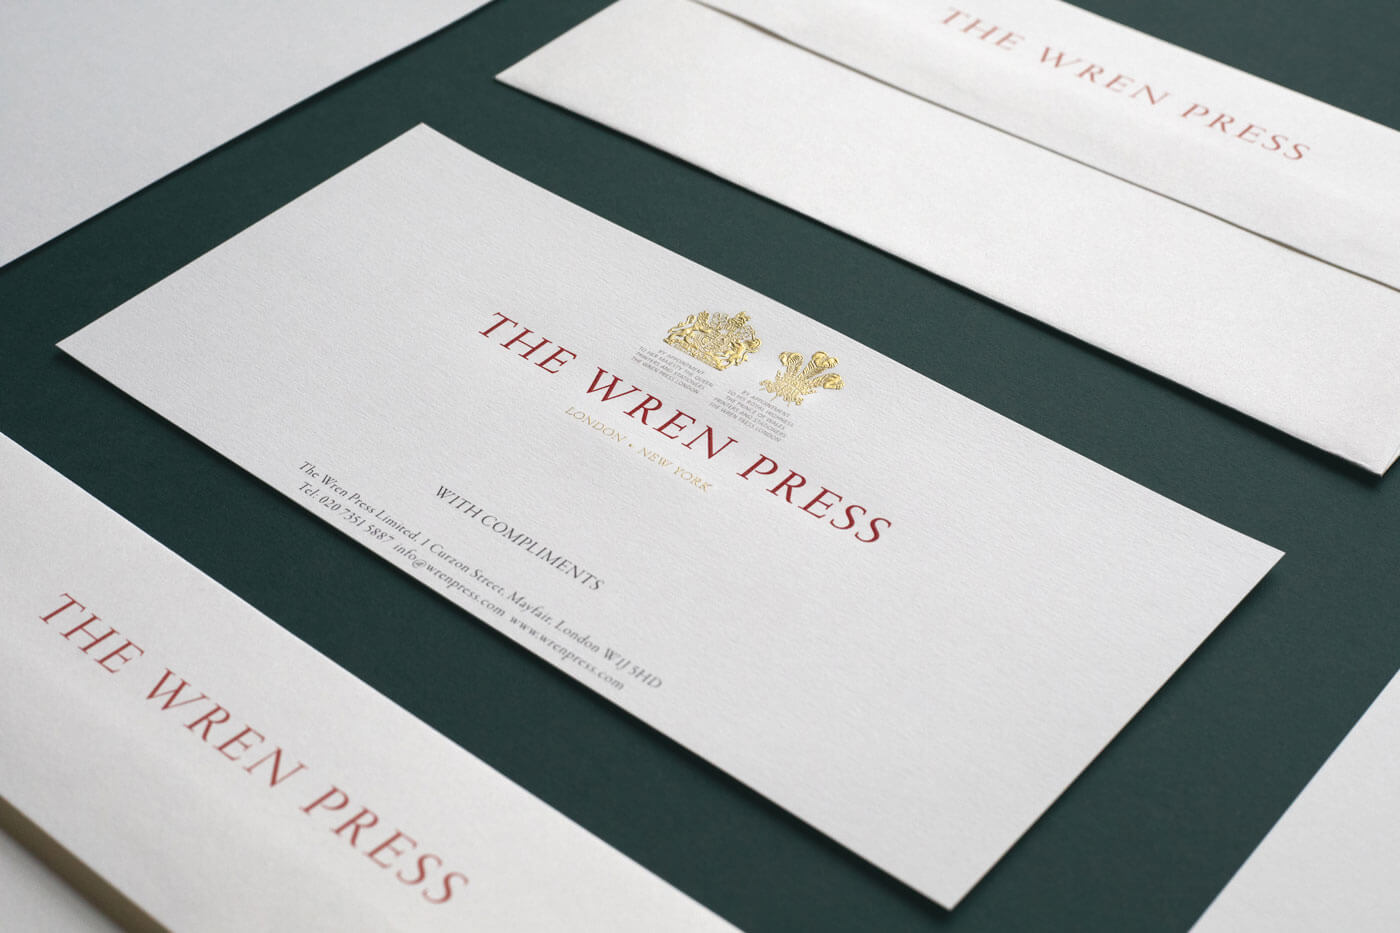 luxury compliment slip with gold crest logos printed on white paper